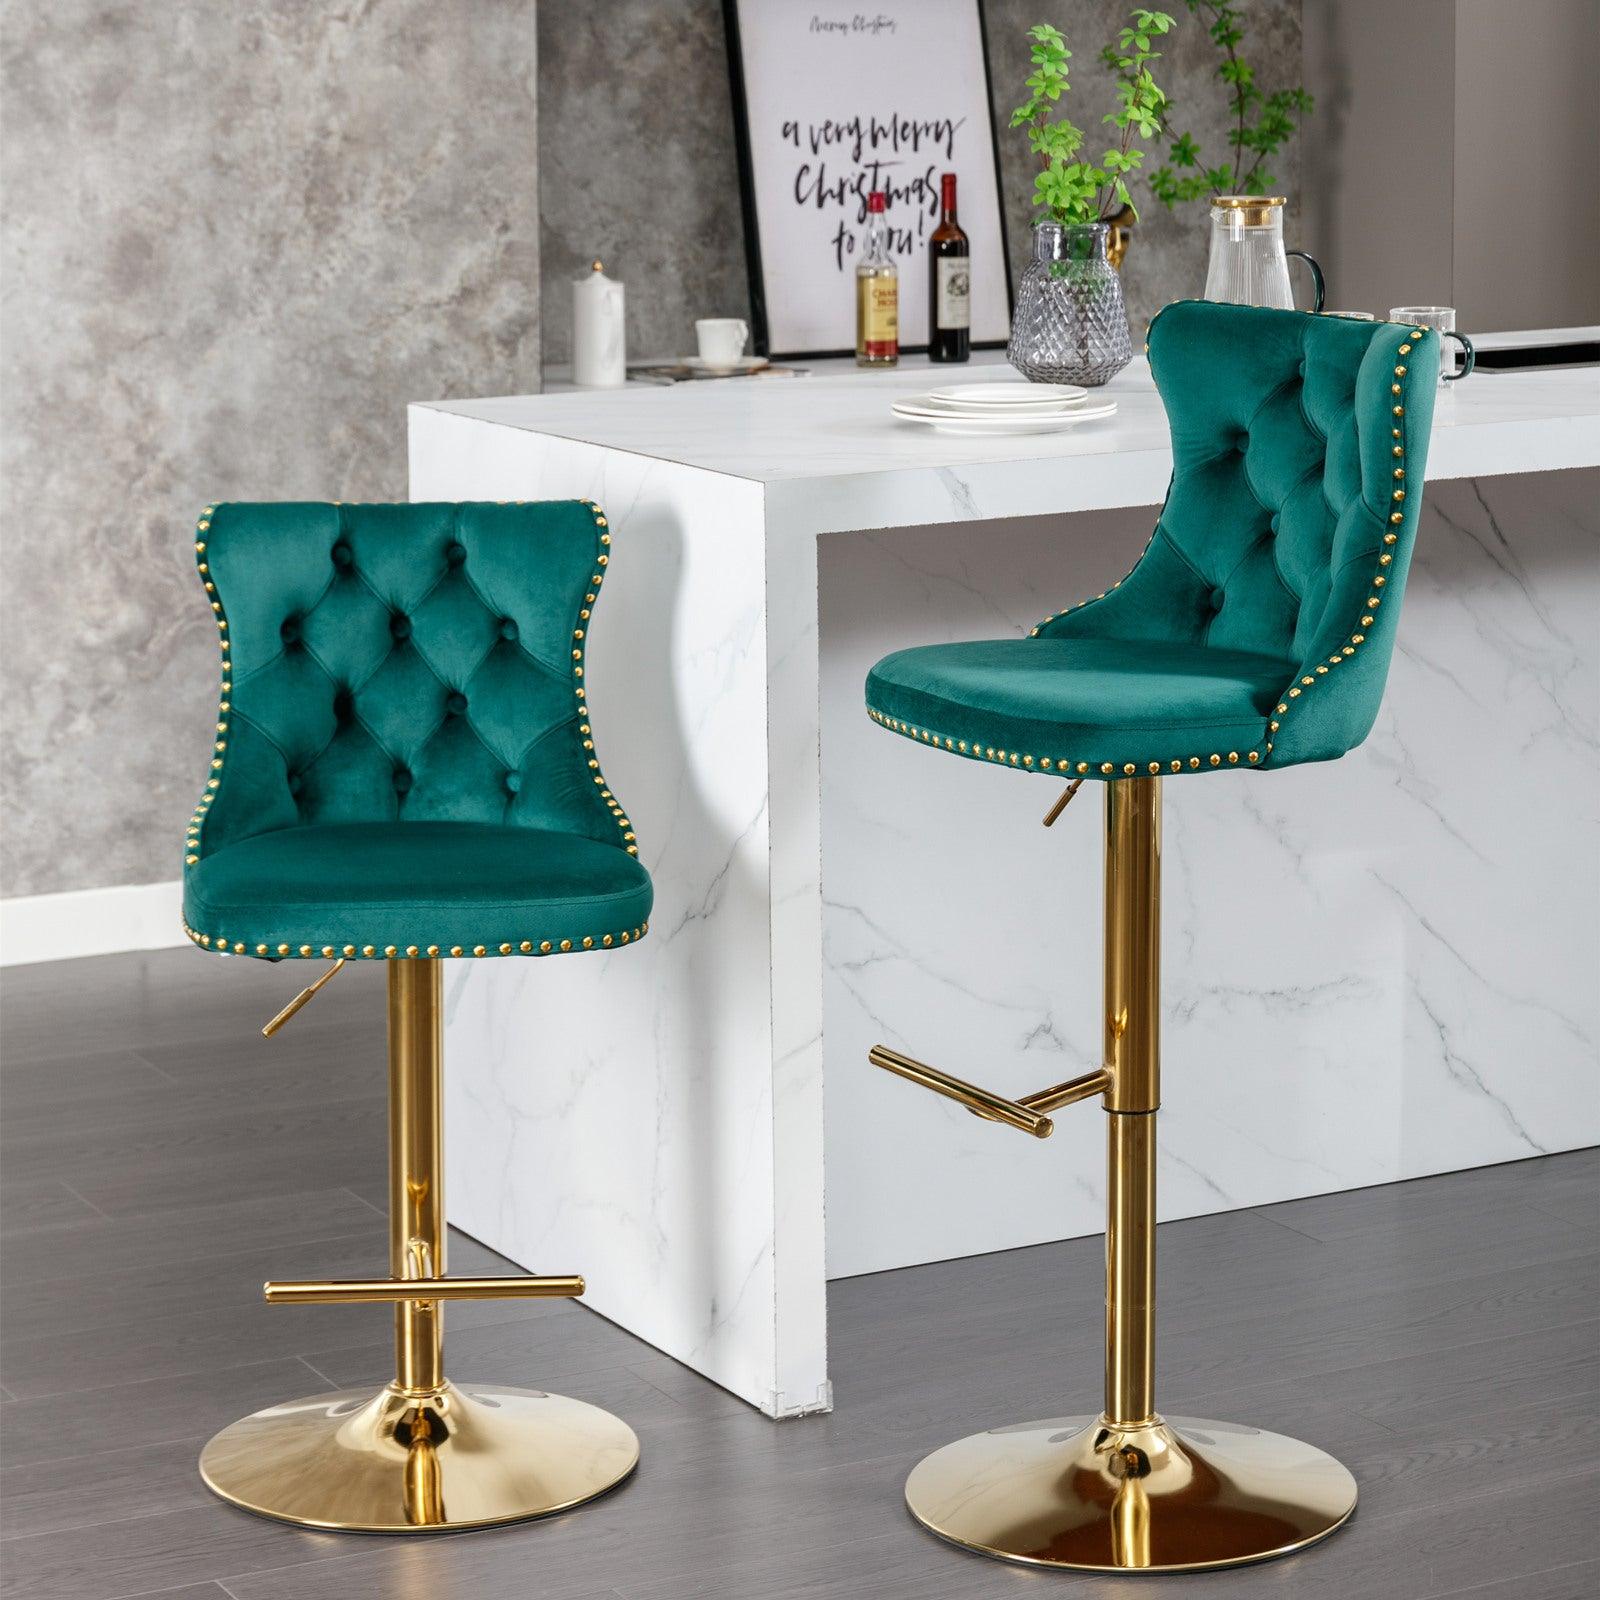 🆓🚛 Golden Swivel Velvet Barstools Adjusatble Seat Height From 25-33 Inch, Modern Upholstered Bar Stools With Backs Comfortable Tufted for Home Pub & Kitchen Island, Green, Set Of 2）